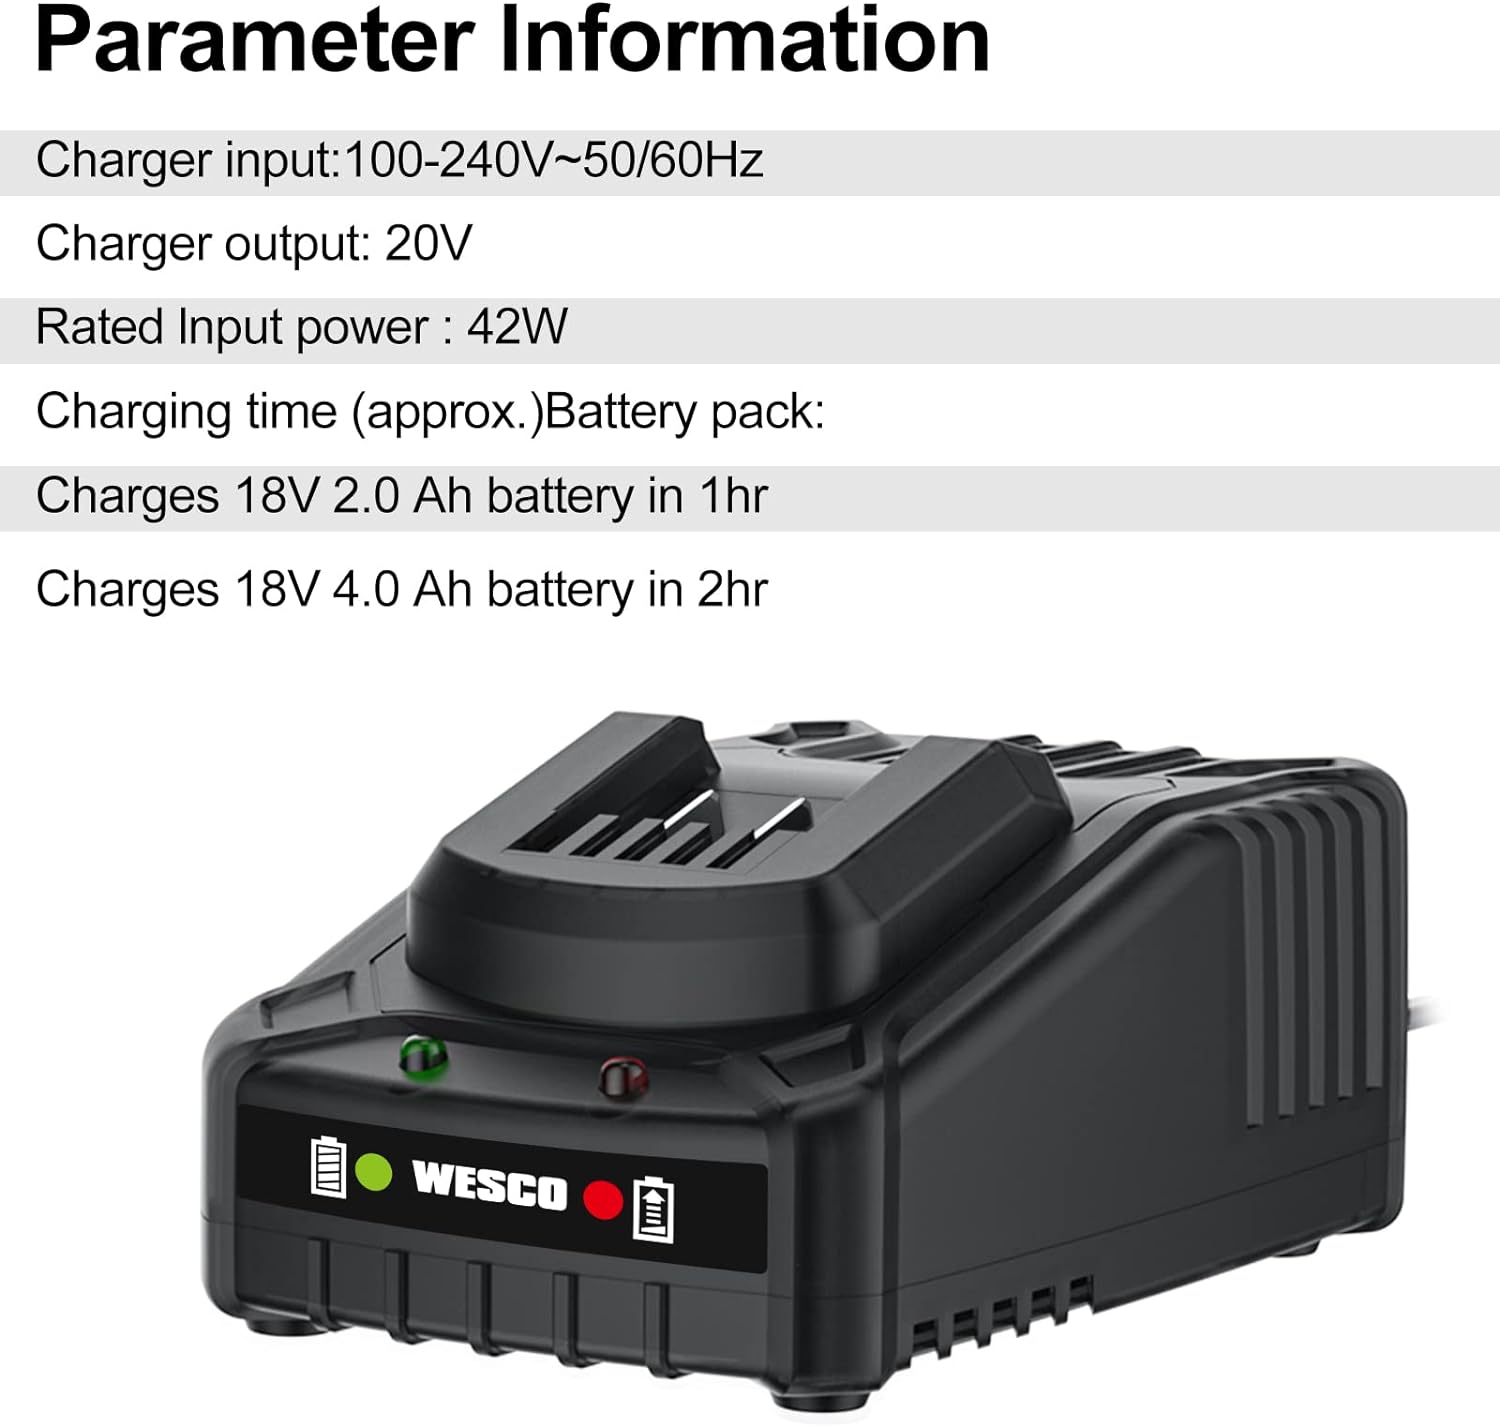 WESCO 18V MAX Battery Charger for WESCO Tools 18V Lithium Battery